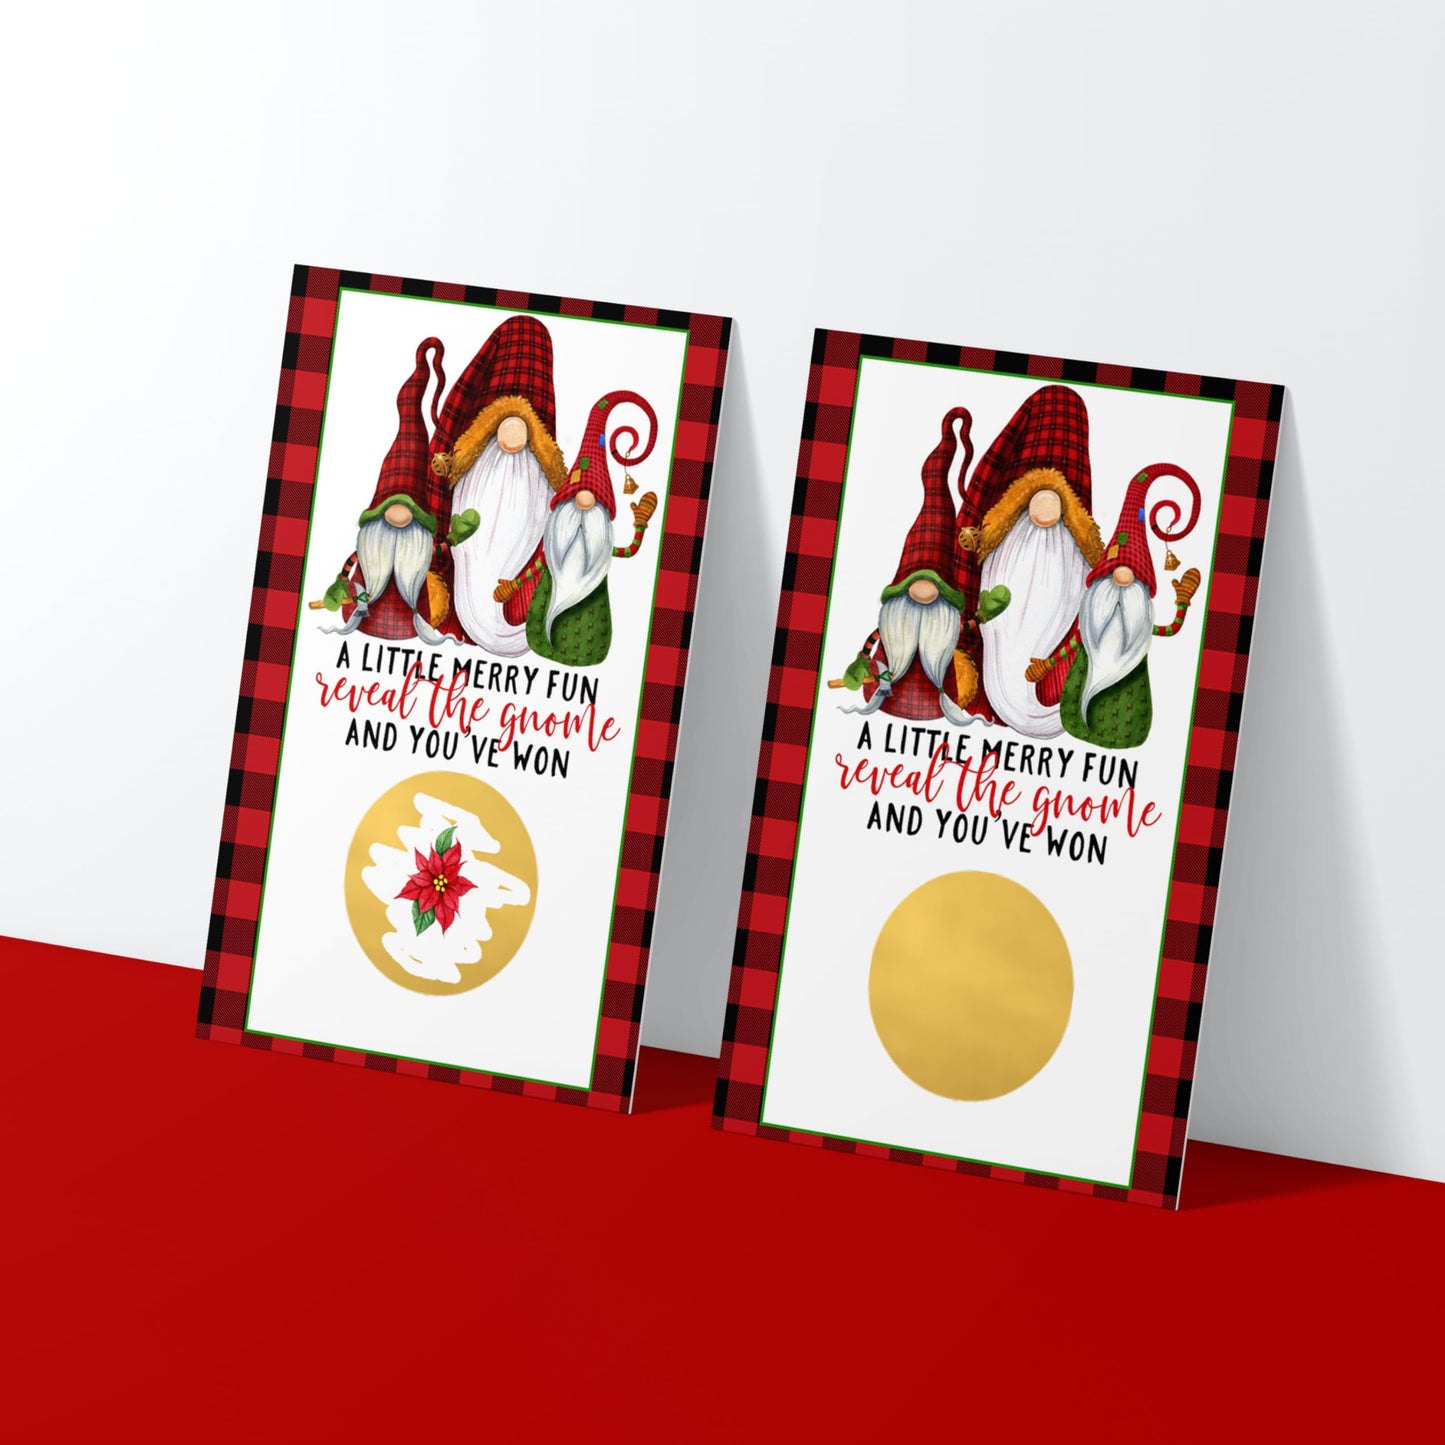 Cards, Christmas Party Games Adults, Groups, Thanksgiving Activities, Holiday Scratcher Tickets, RedPaper Clever Party